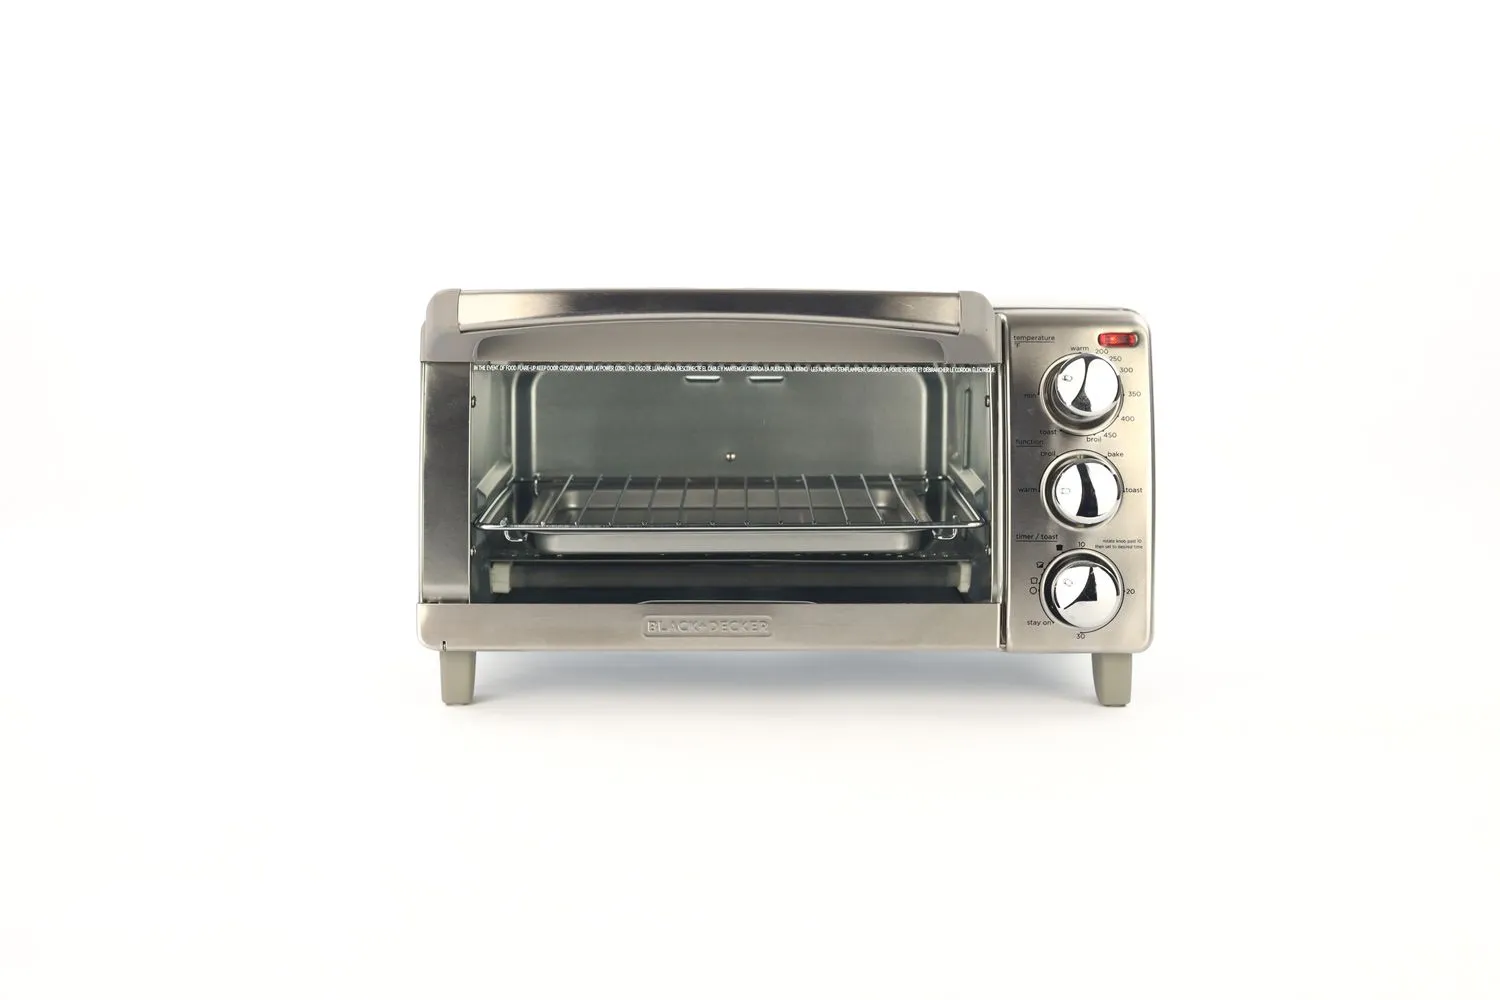 https://cdn.healthykitchen101.com/reviews/images/toaster-ovens/cl9wee50l004oq588avguawcv.jpg